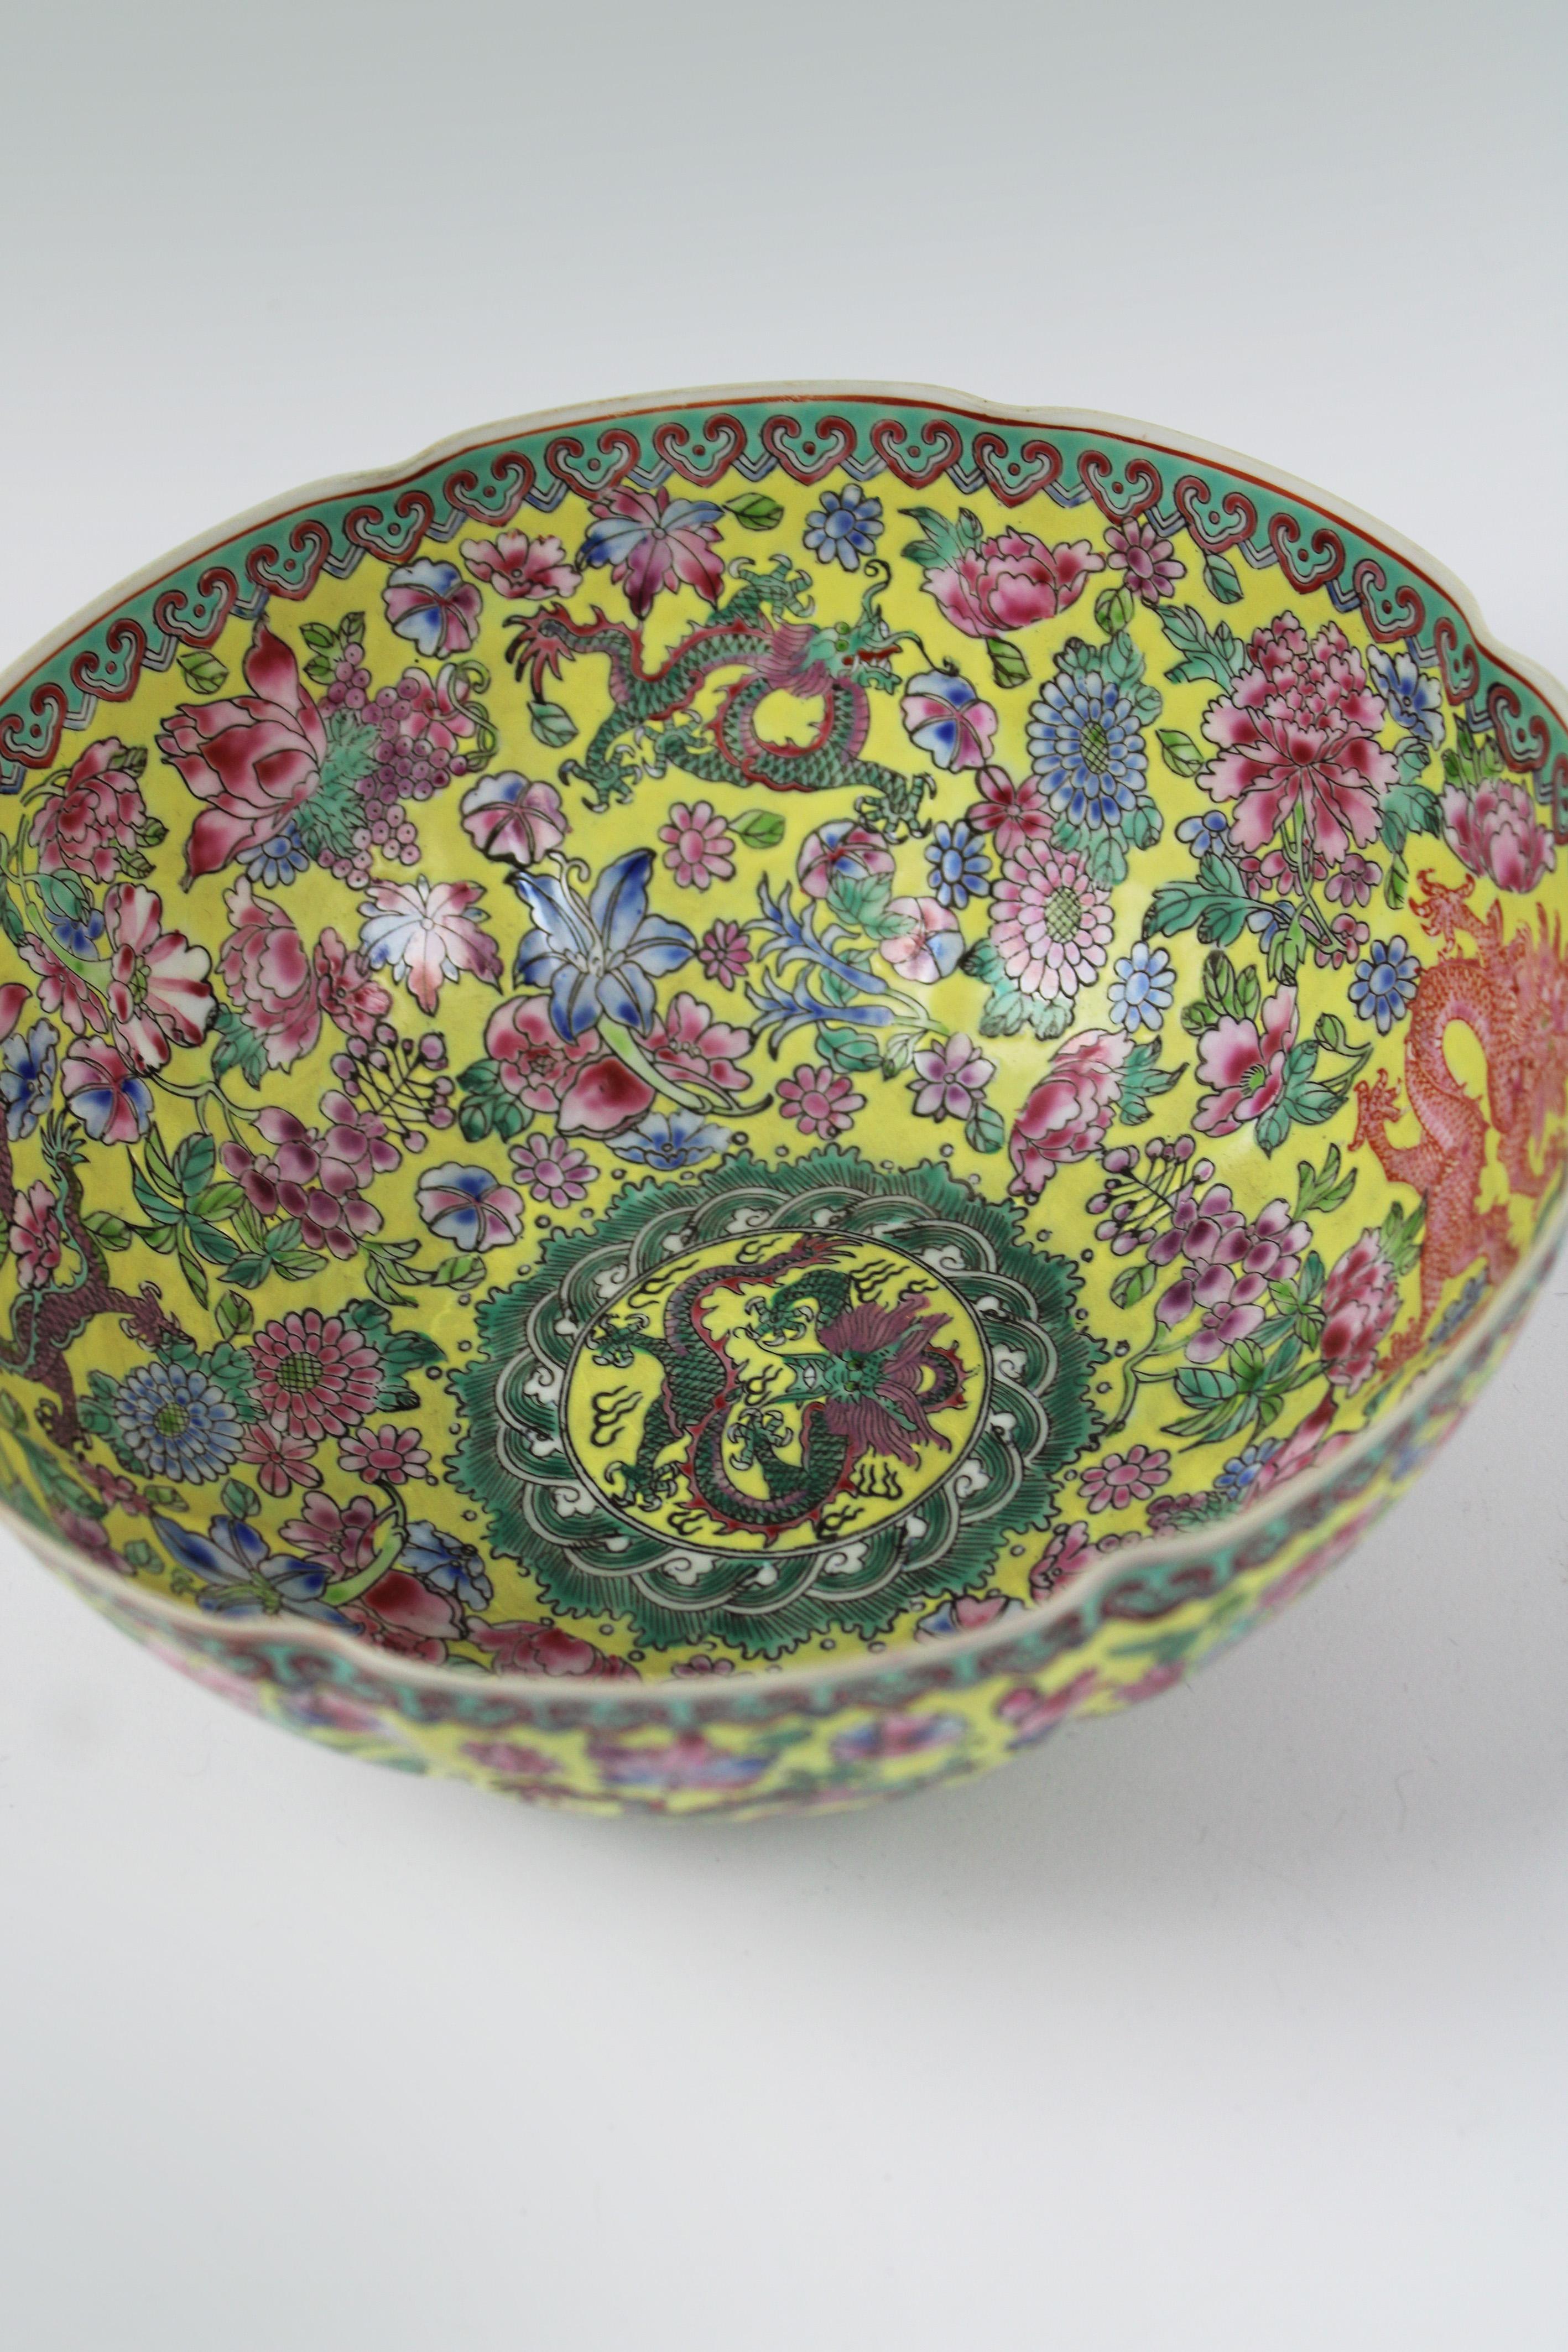 Chinese Imperial Yellow Bowl Egg Shell Porcelain 5 clawed Dragons 20th Century For Sale 4